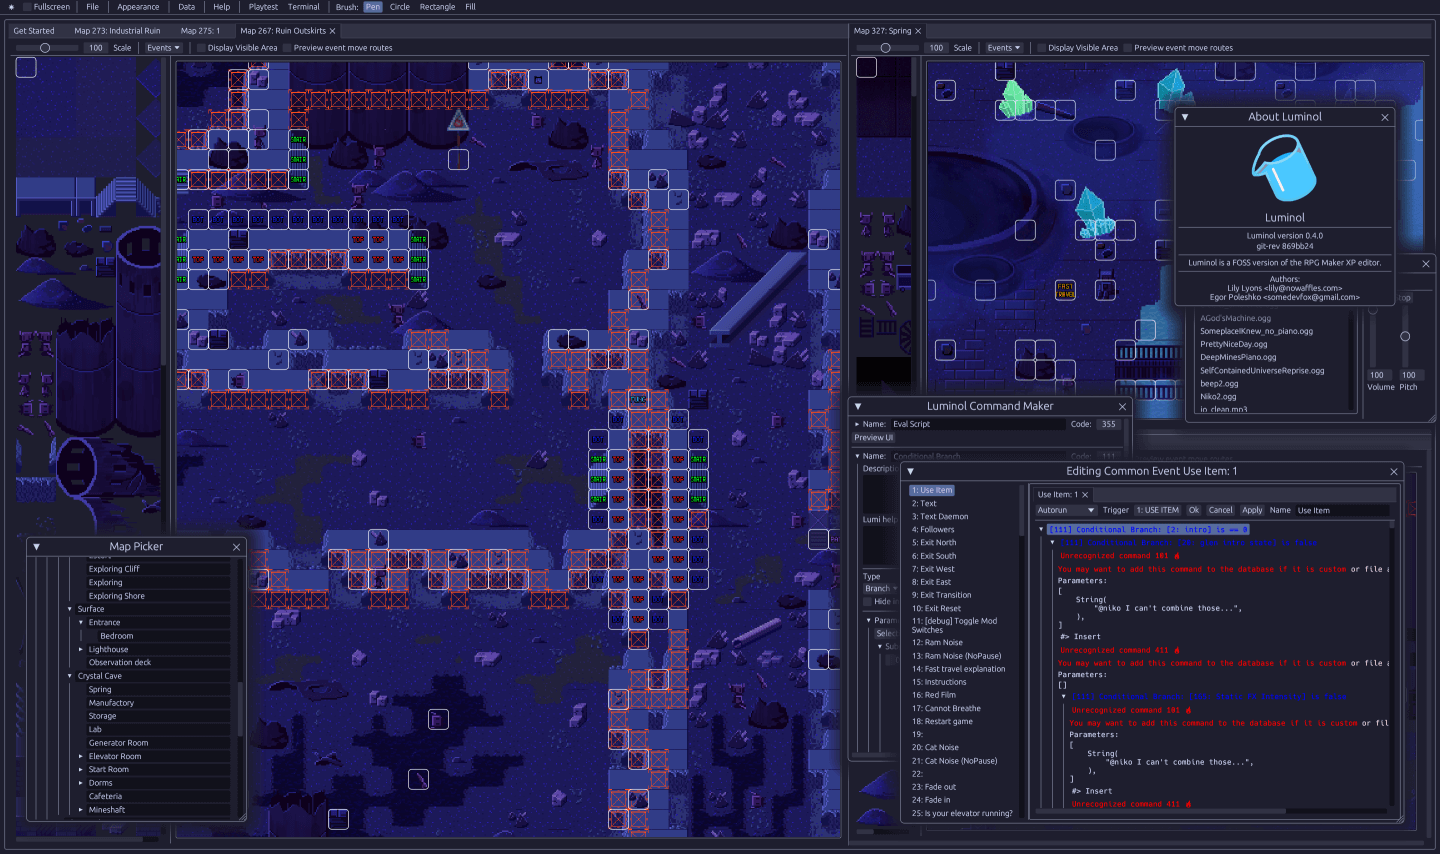 tile map editor and other tool windows like command event editor